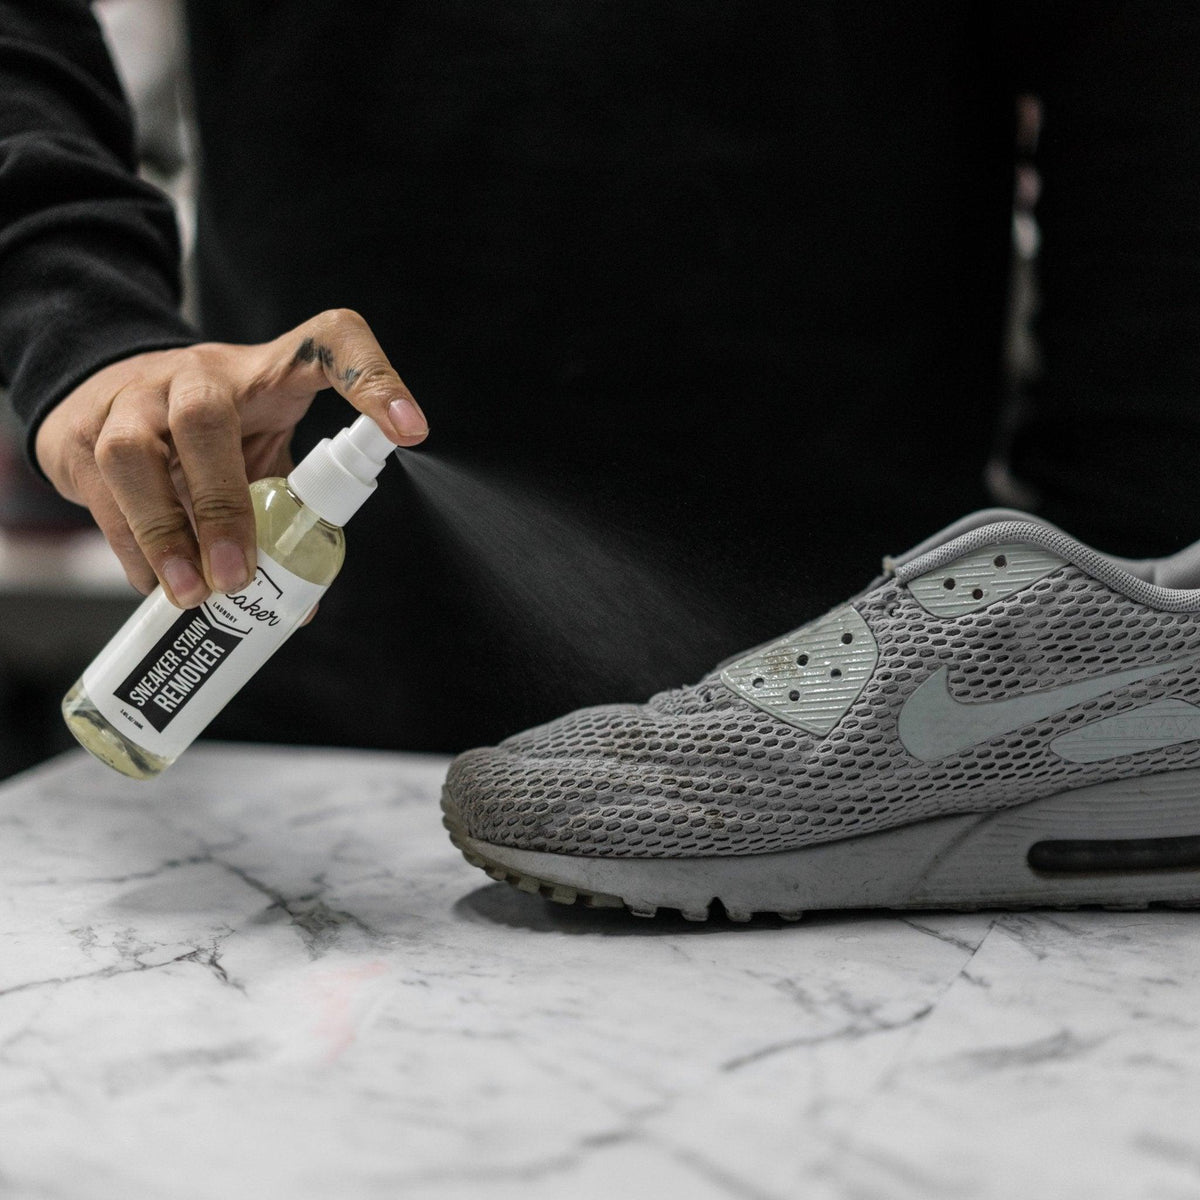 Sneaker Stain Remover - The Sneaker Laundry